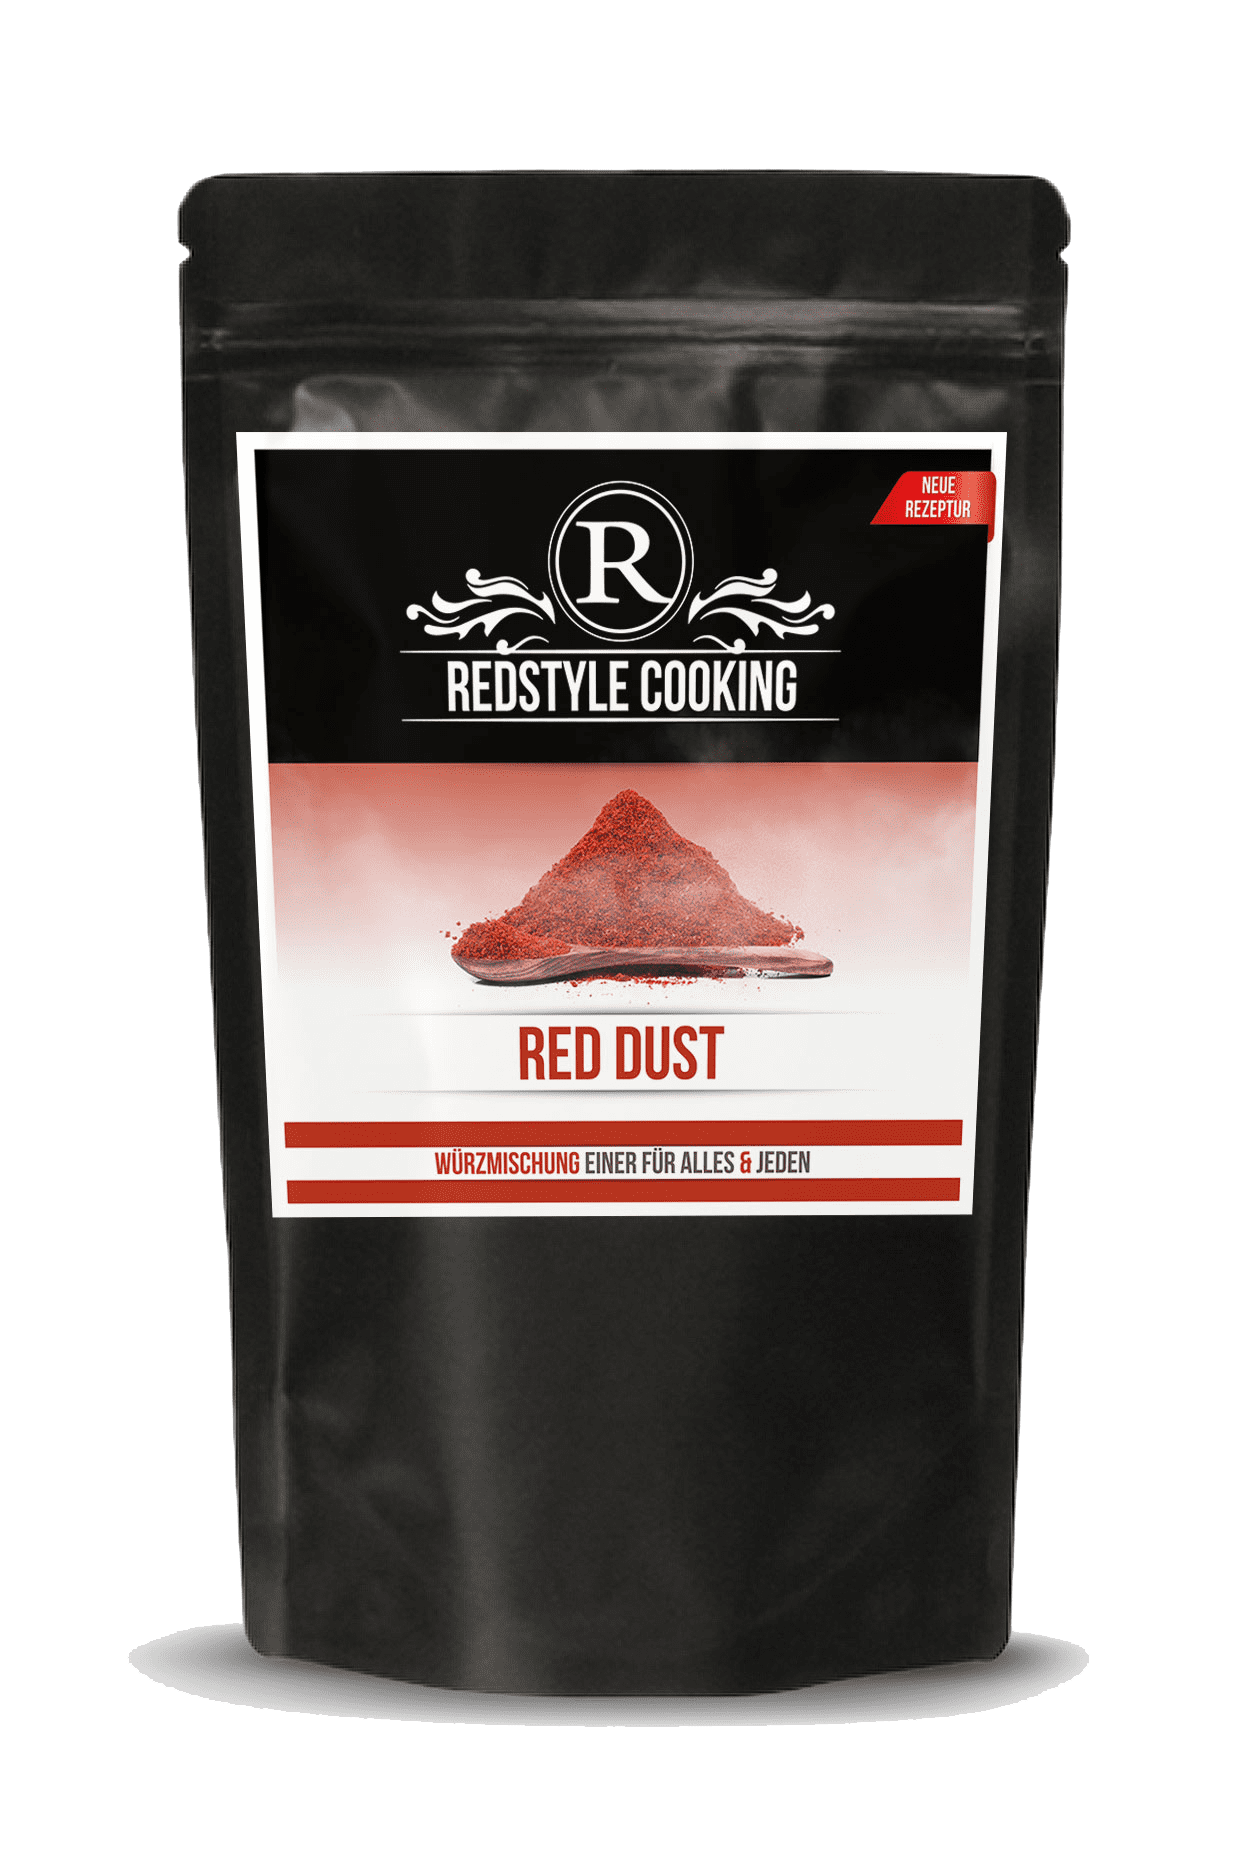 Red Dust, Redstyle Cooking